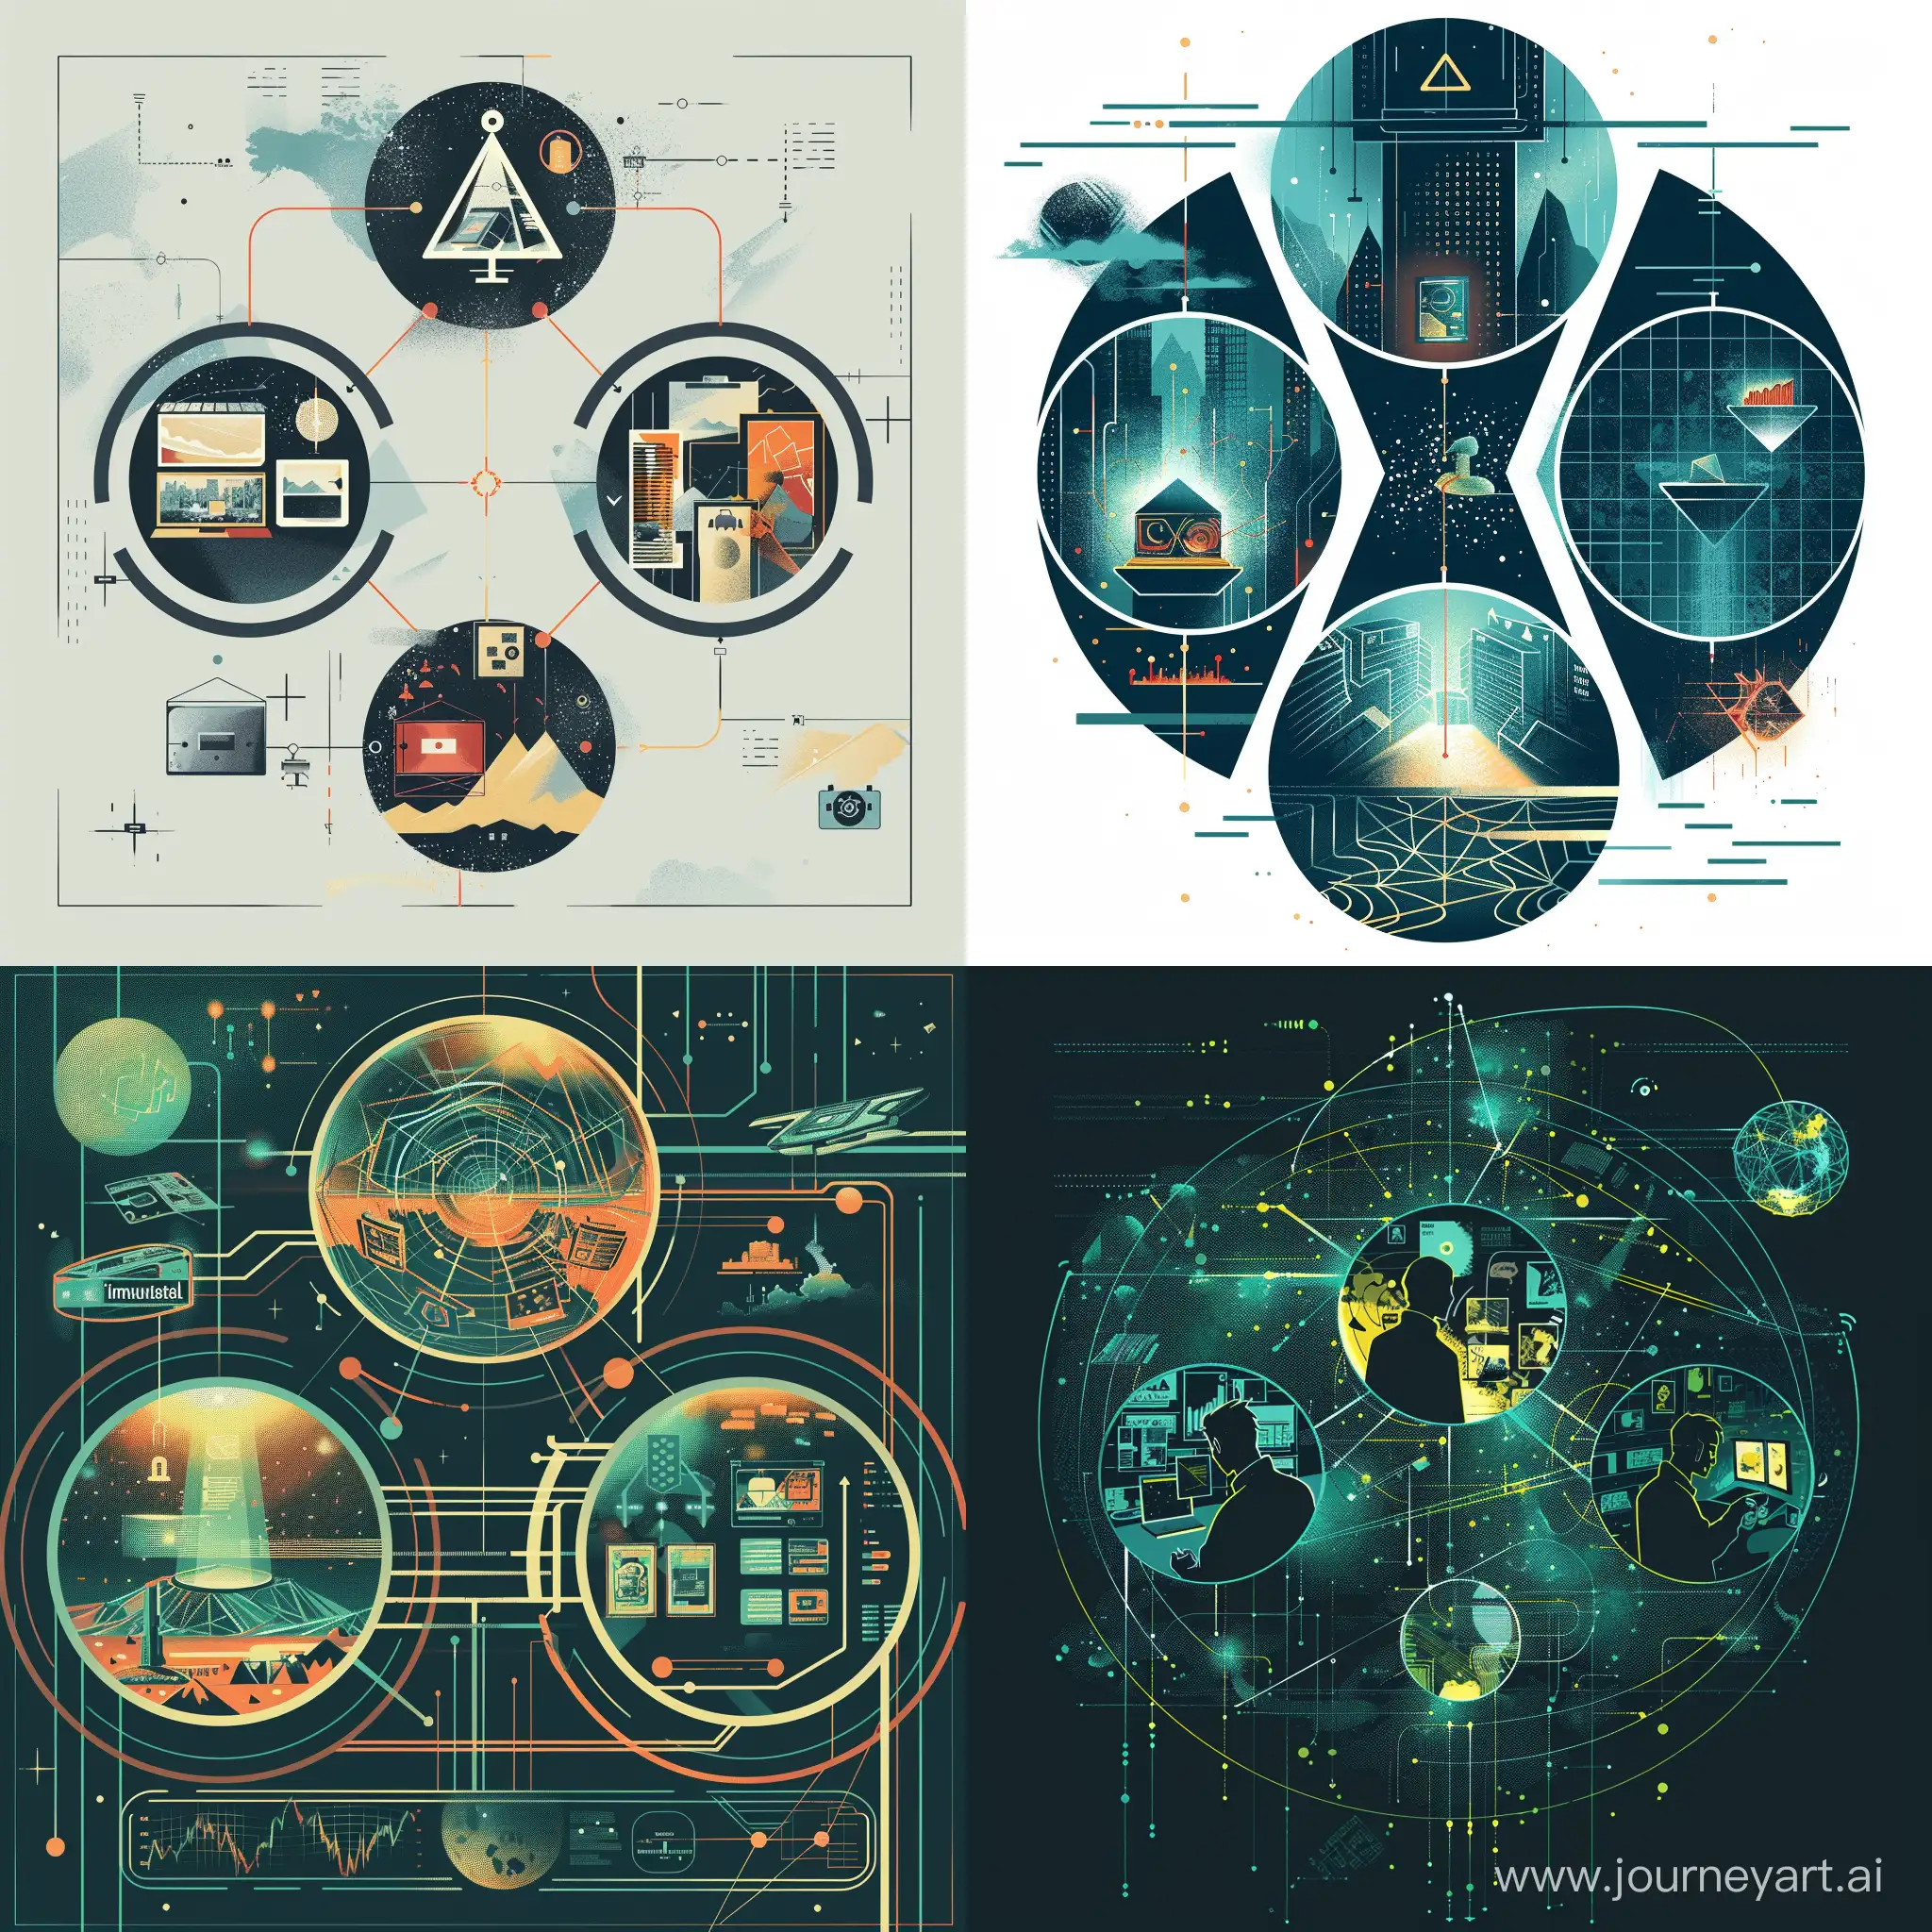 "Generate a visual representation of a triad in cybersecurity with a cyberpunk aesthetic. Utilize three circles containing pictures to symbolize the three elements: Distributed, Immutable, and Ephemeral. Incorporate illustrations representing distributed networks, immutable nature, and short-lived data. Ensure the design is sleek, clear, and conveys the idea of balancing these factors for optimal security. Feel free to experiment with cyberpunk-inspired colors and layout to make it visually appealing."